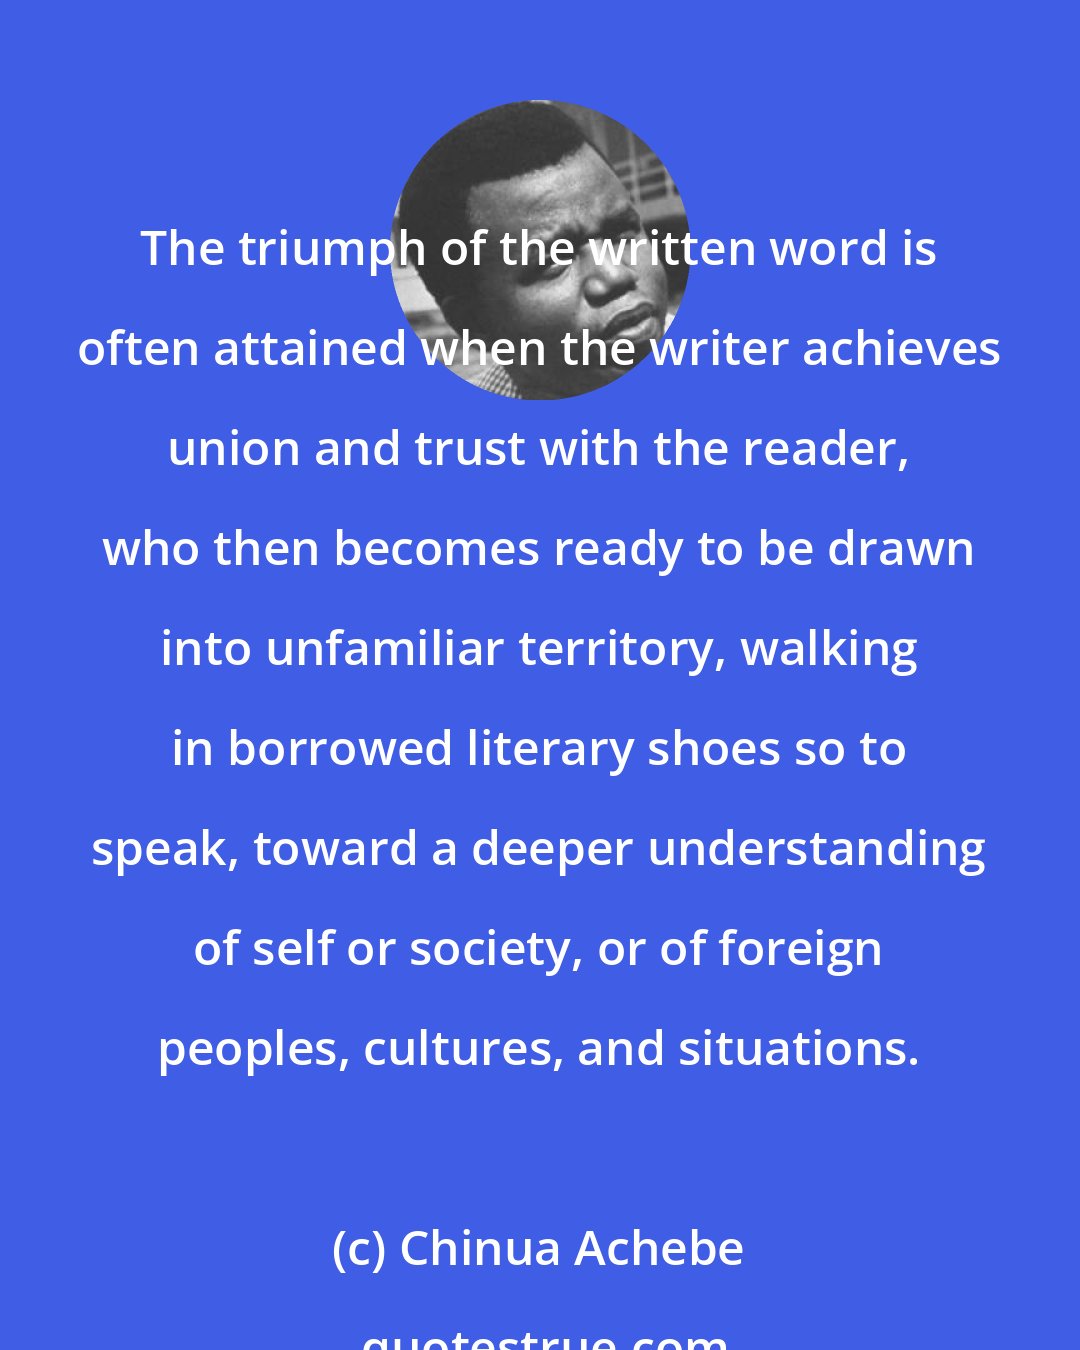 Chinua Achebe: The triumph of the written word is often attained when the writer achieves union and trust with the reader, who then becomes ready to be drawn into unfamiliar territory, walking in borrowed literary shoes so to speak, toward a deeper understanding of self or society, or of foreign peoples, cultures, and situations.